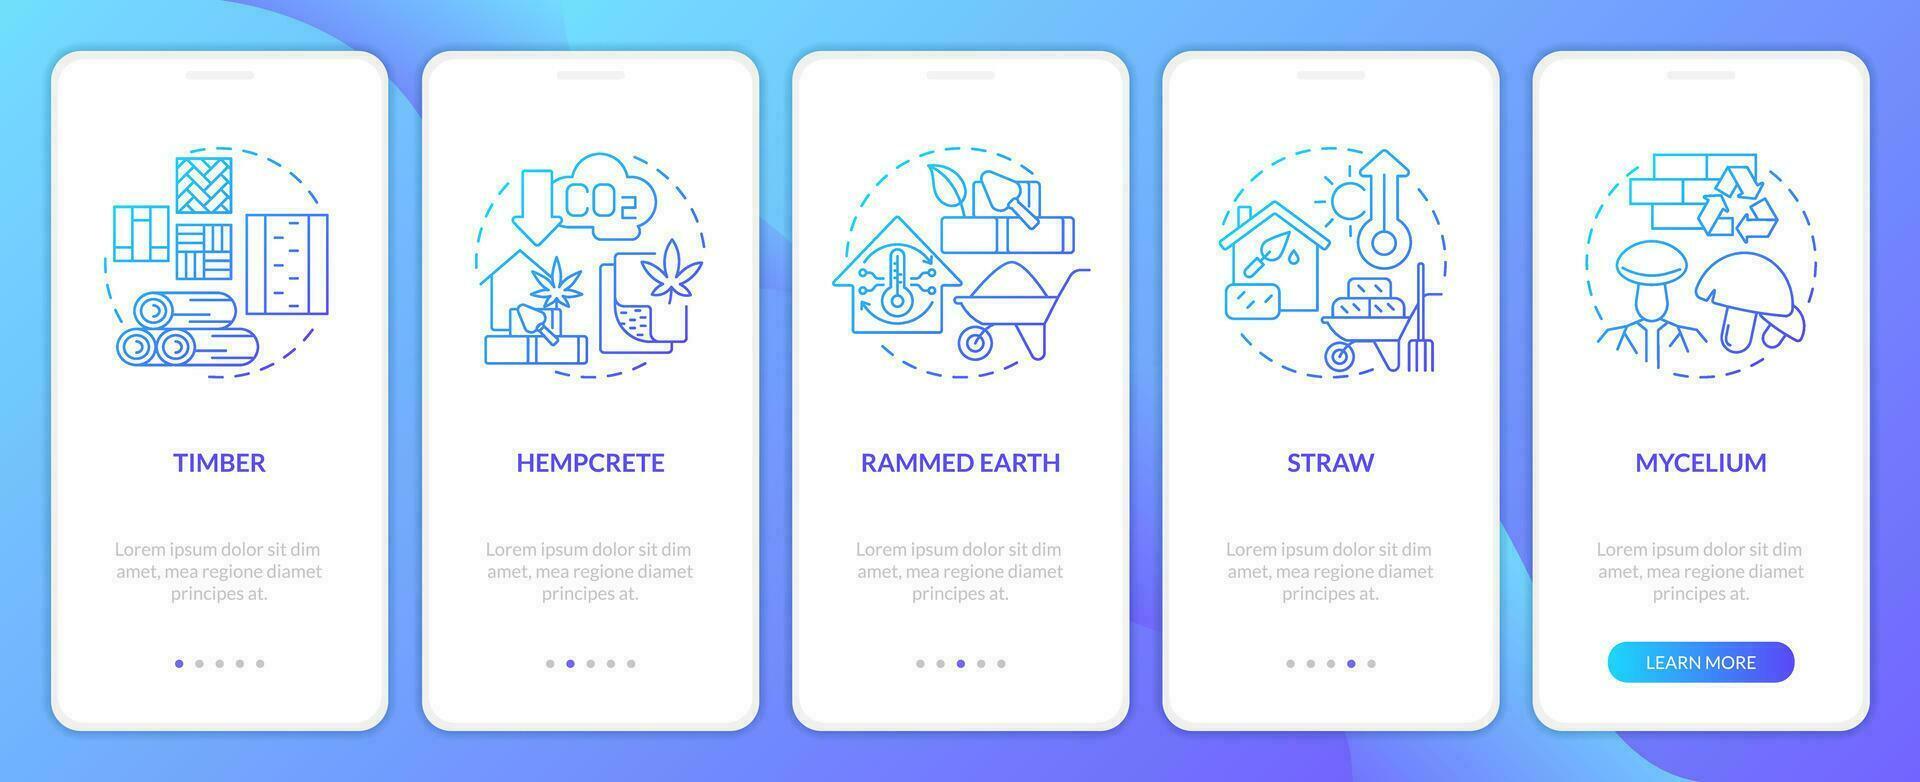 Bio based construction blue gradient onboarding mobile app screen. Walkthrough 5 steps graphic instructions with linear concepts. UI, UX, GUI templated vector